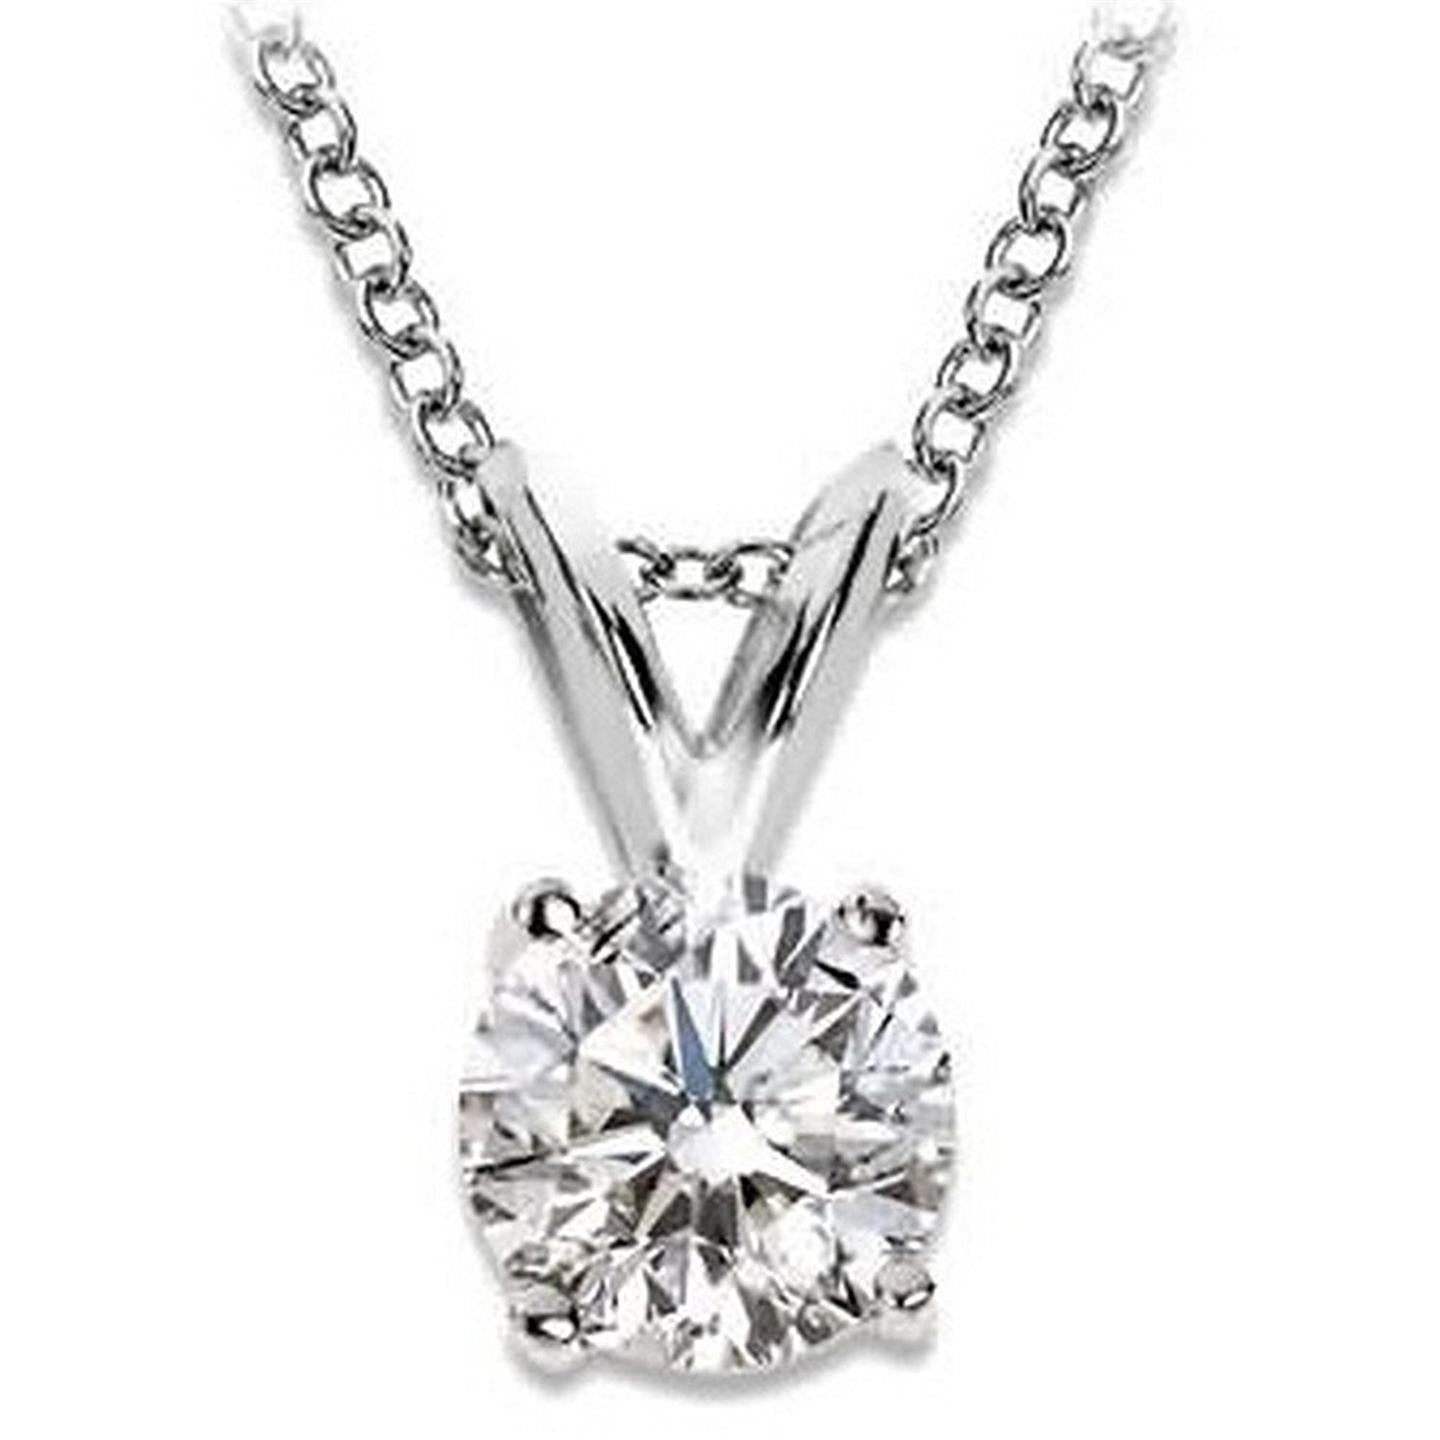 Pendentif Collier Diamant Solitaire Rond 2.75 Ct Or Blanc 14K - HarryChadEnt.FR